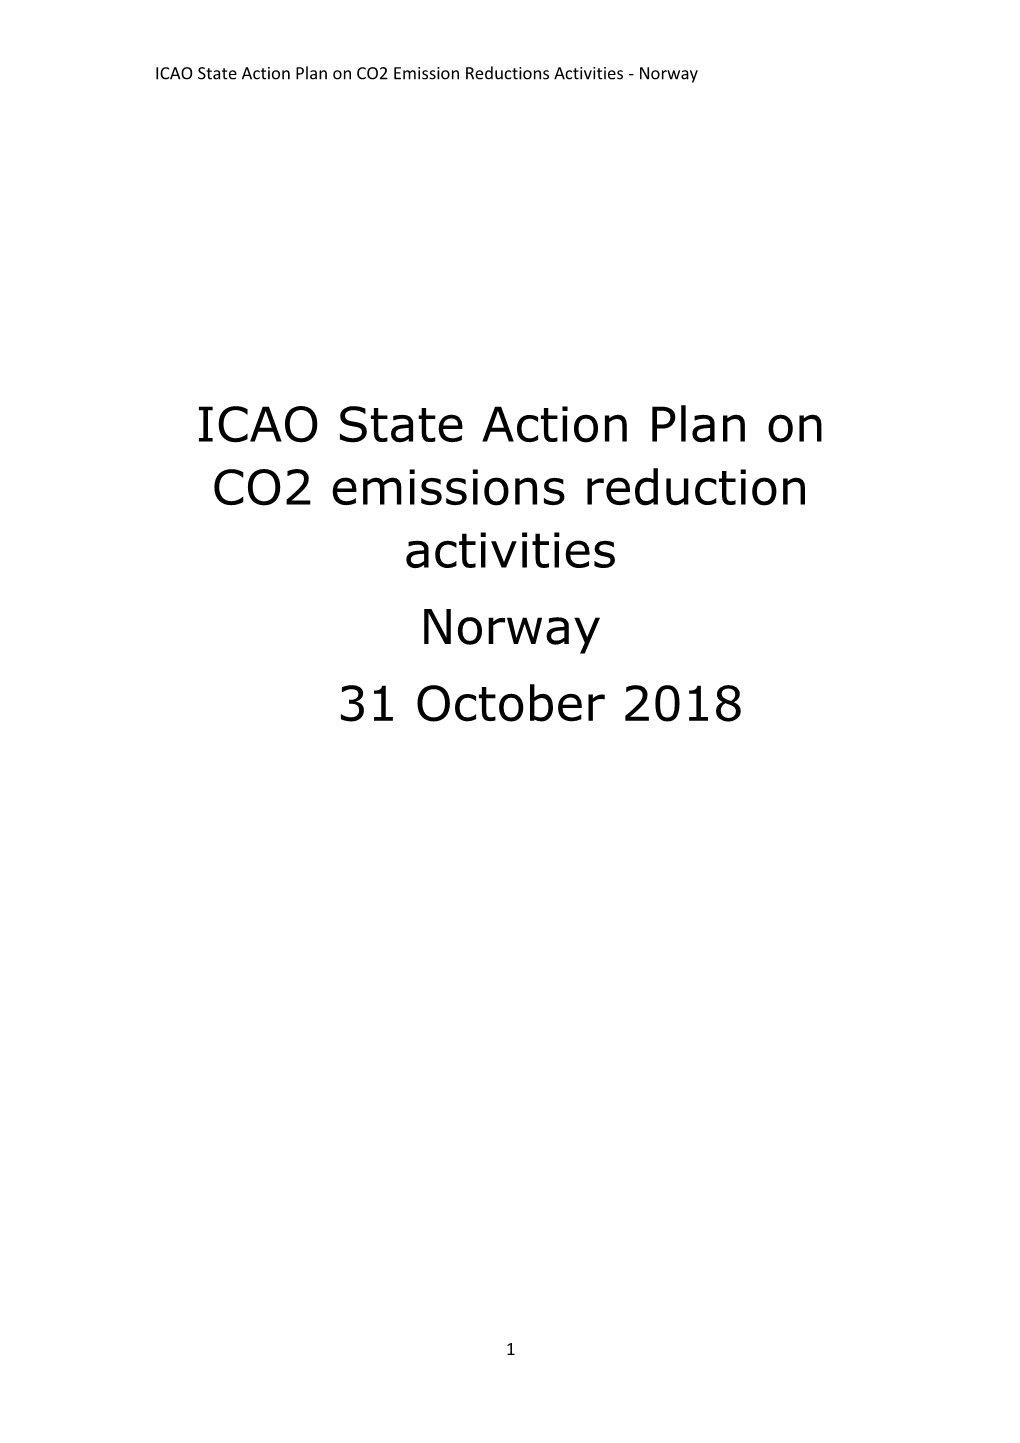 ICAO State Action Plan on CO2 Emissions Reduction Activities Norway 31 October 2018